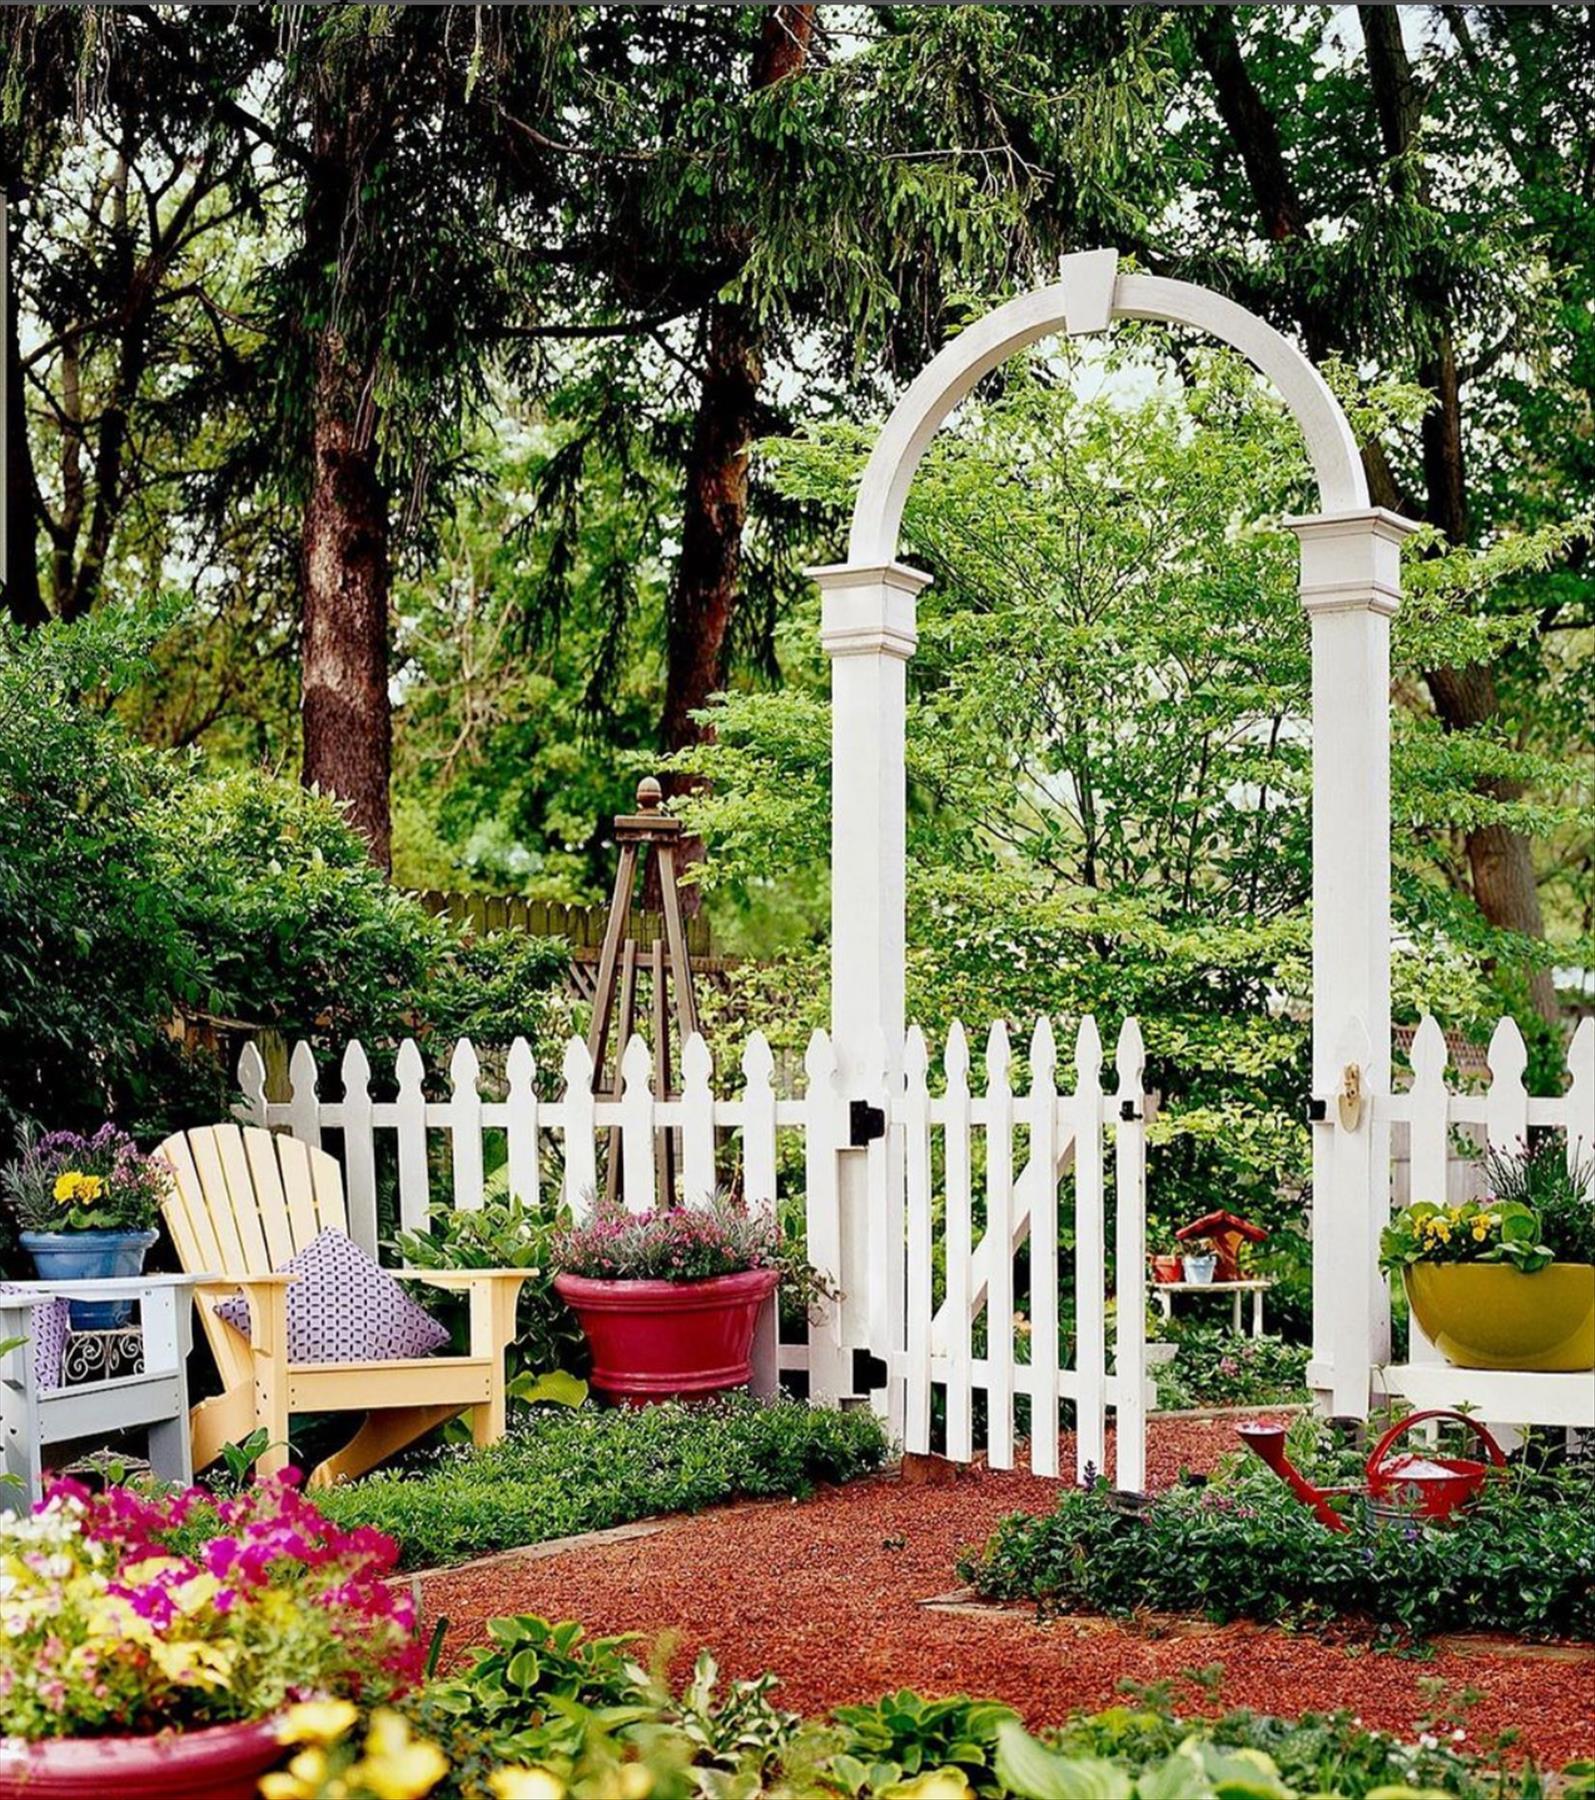 Best Backyard Landscaping Ideas for A Ultimate Outdoor Living Space